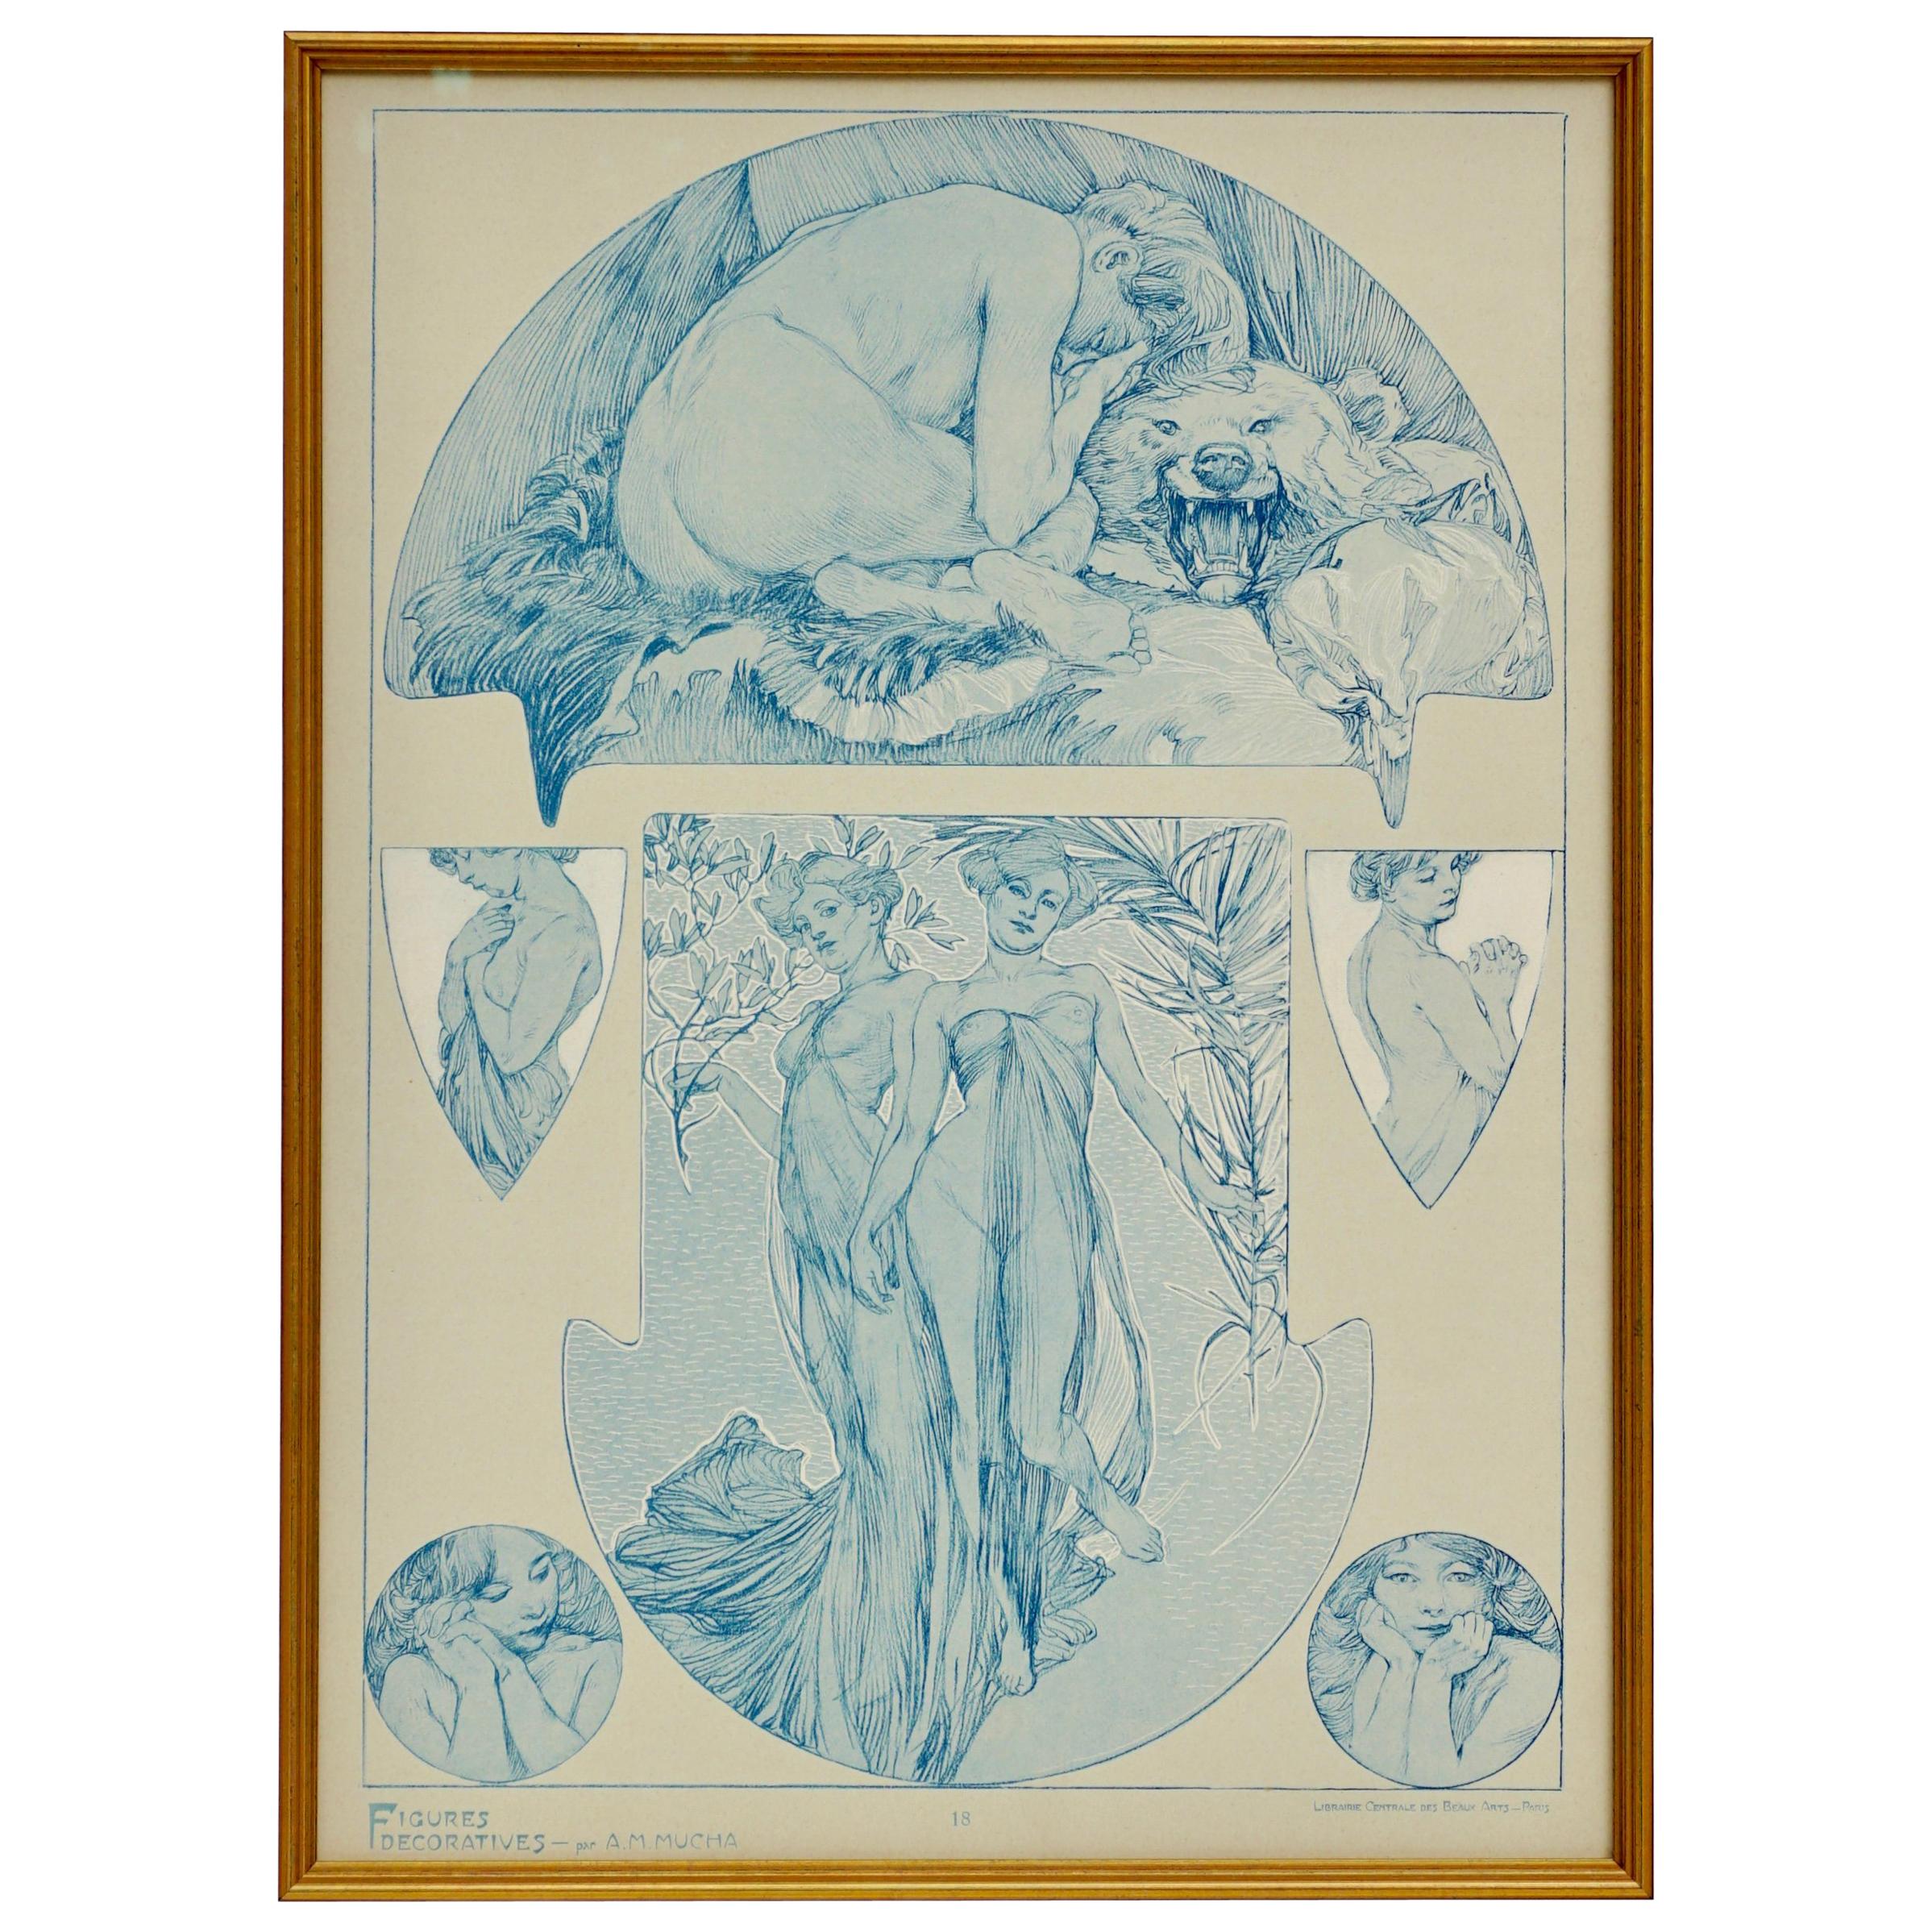 Alphonse Mucha collotype, plate 18 from "Figures Decoratives, " 1905